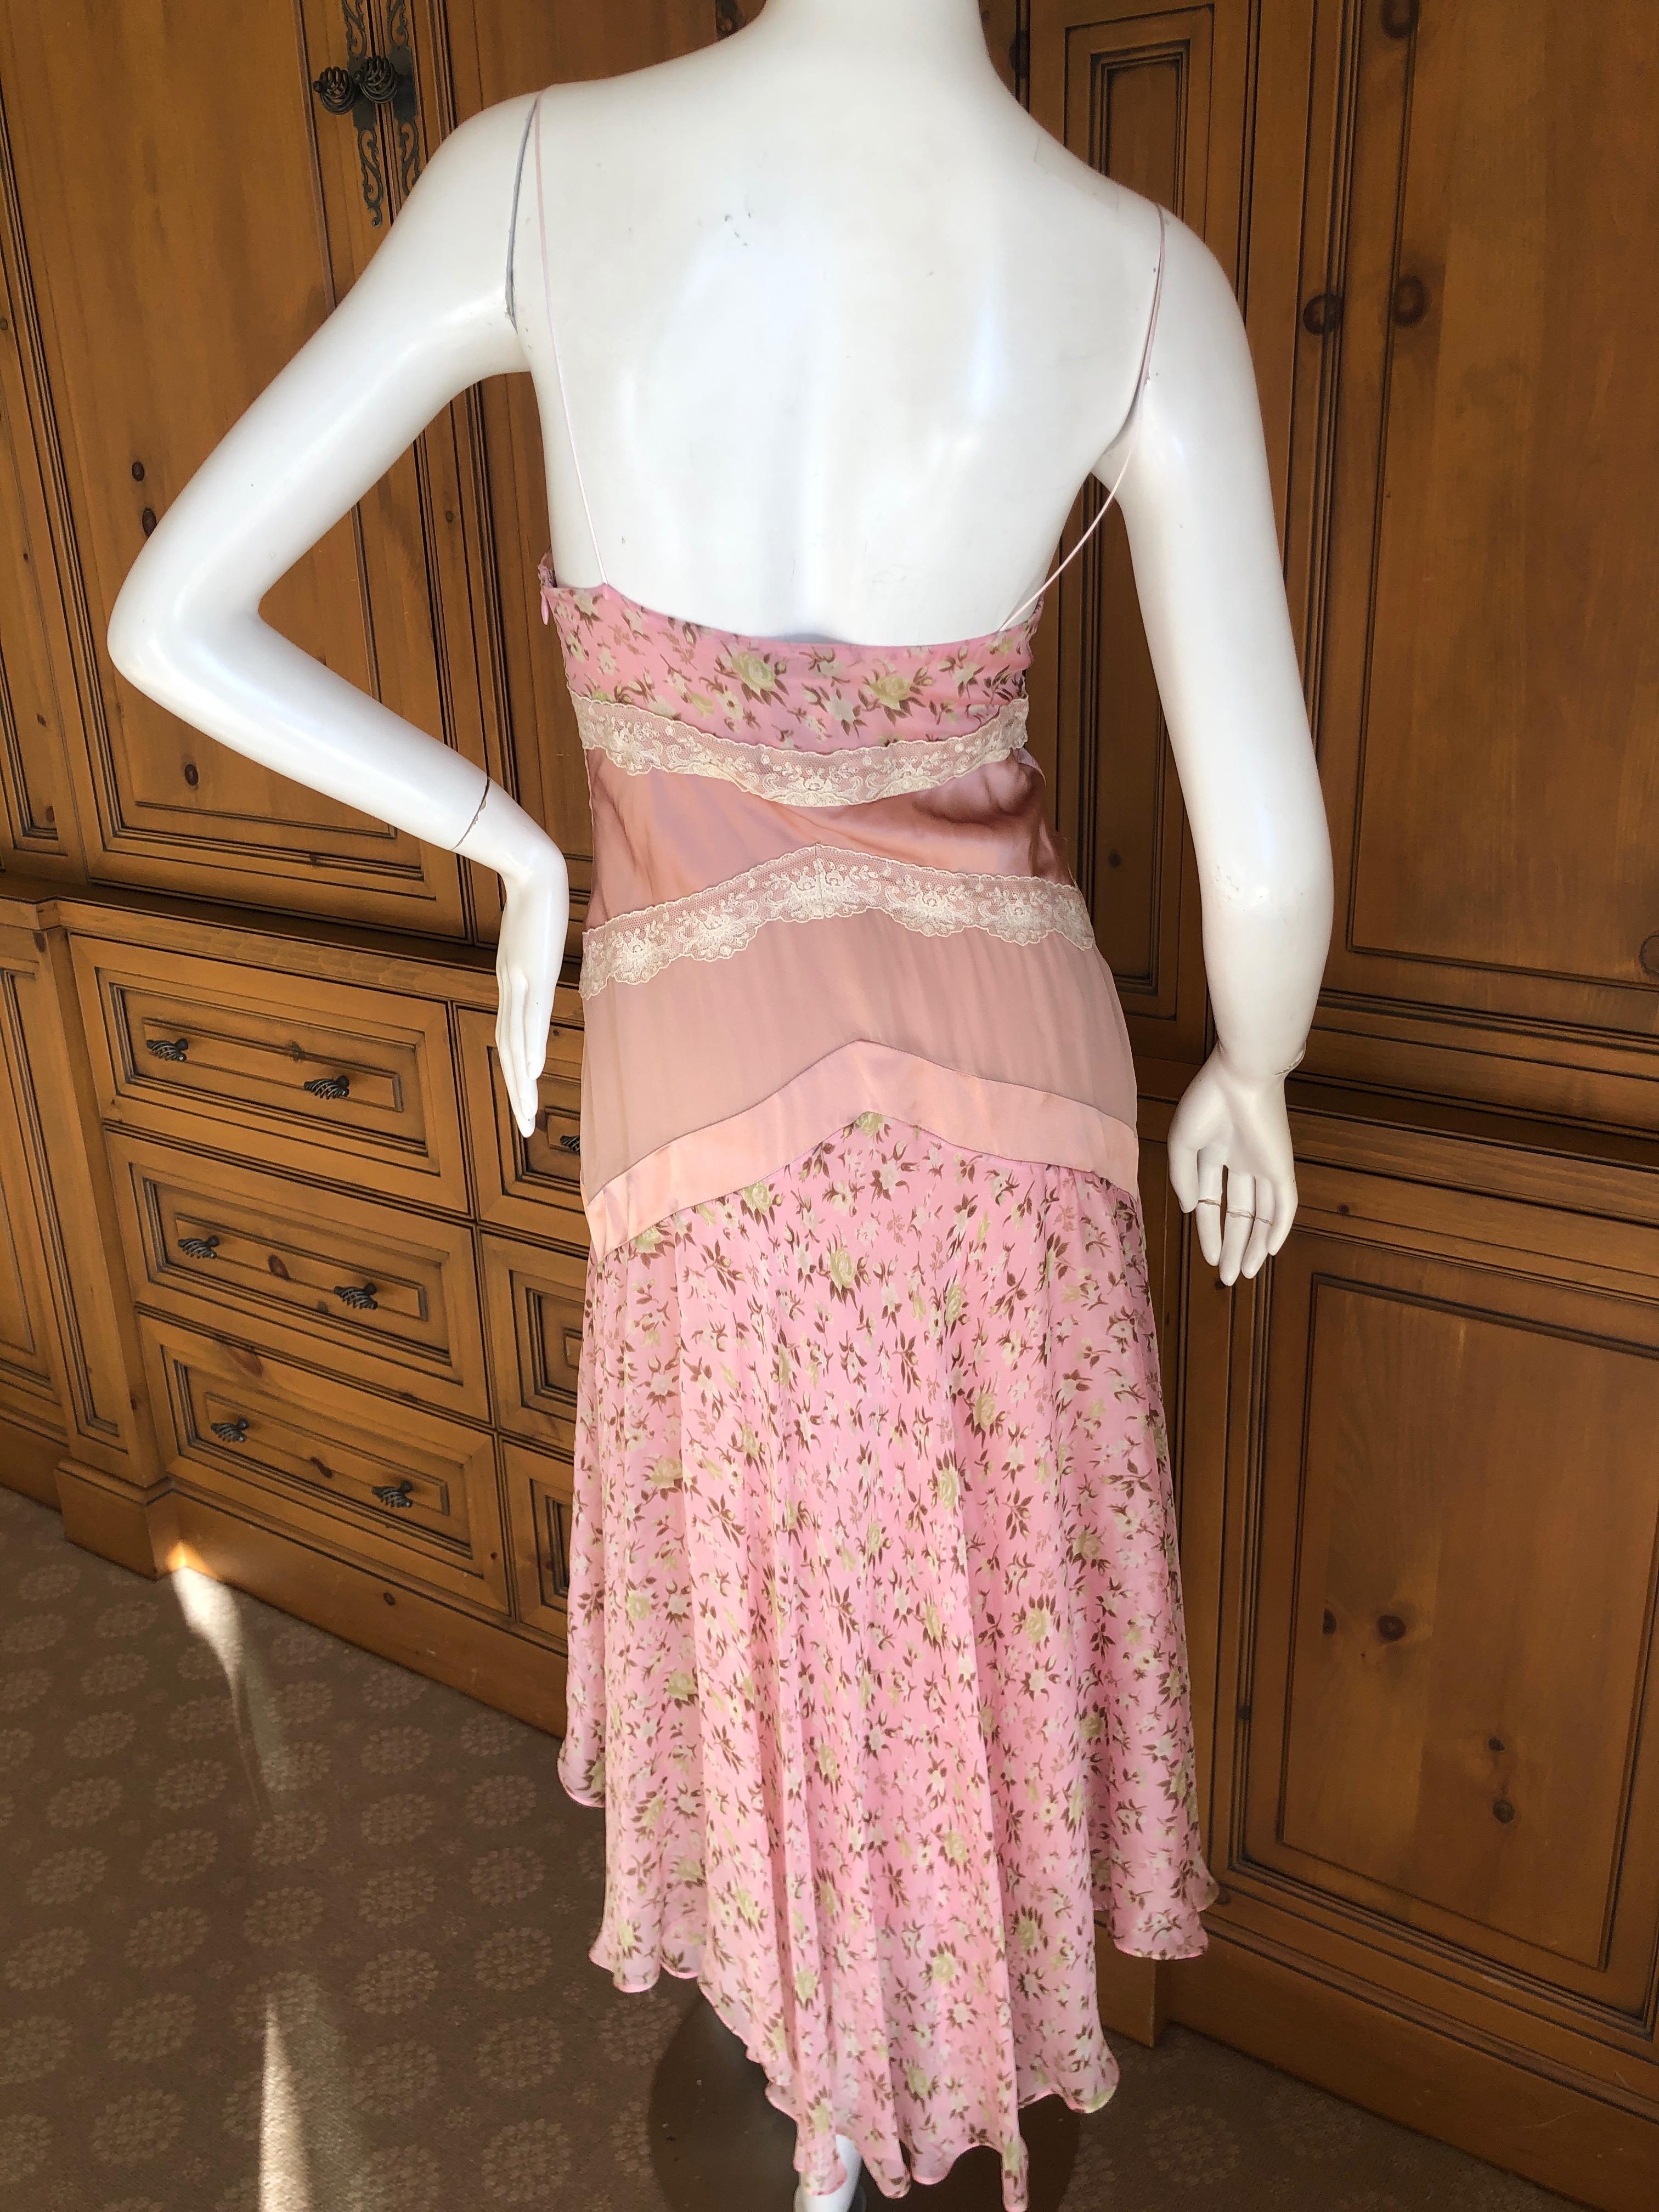 D&G Dolce & Gabbana Romantic Pink Silk Dress with Lace Details For Sale 1